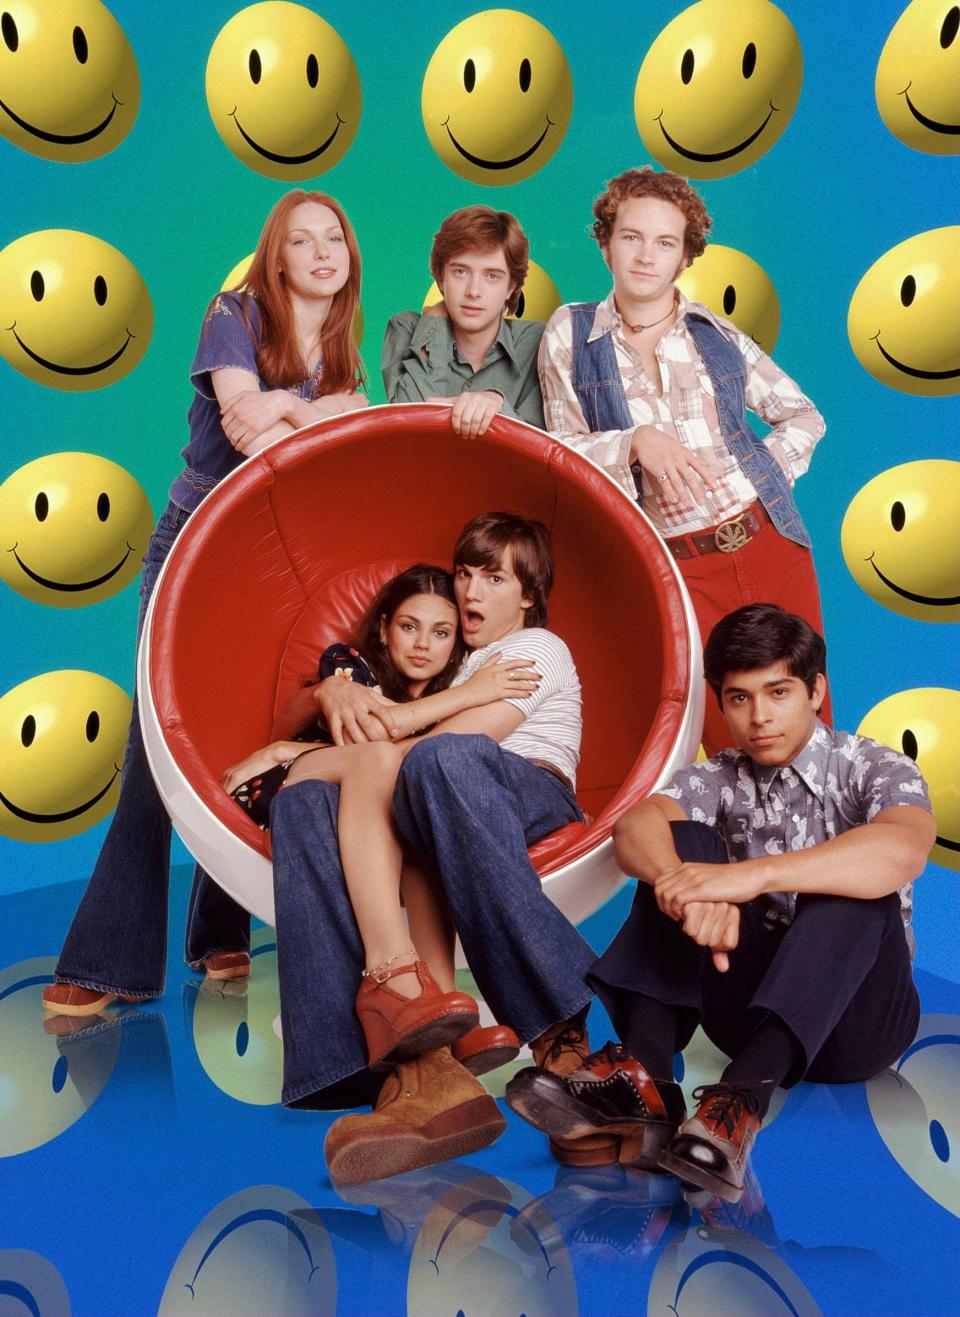 "That '70s Show" followed a group of friends navigating teenage life in Wisconsin. The show starred Laura Prepon (clockwise from back left), Topher Grace, Danny Masterson, Wilmer Valderrama, Ashton Kutcher and Mila Kunis.